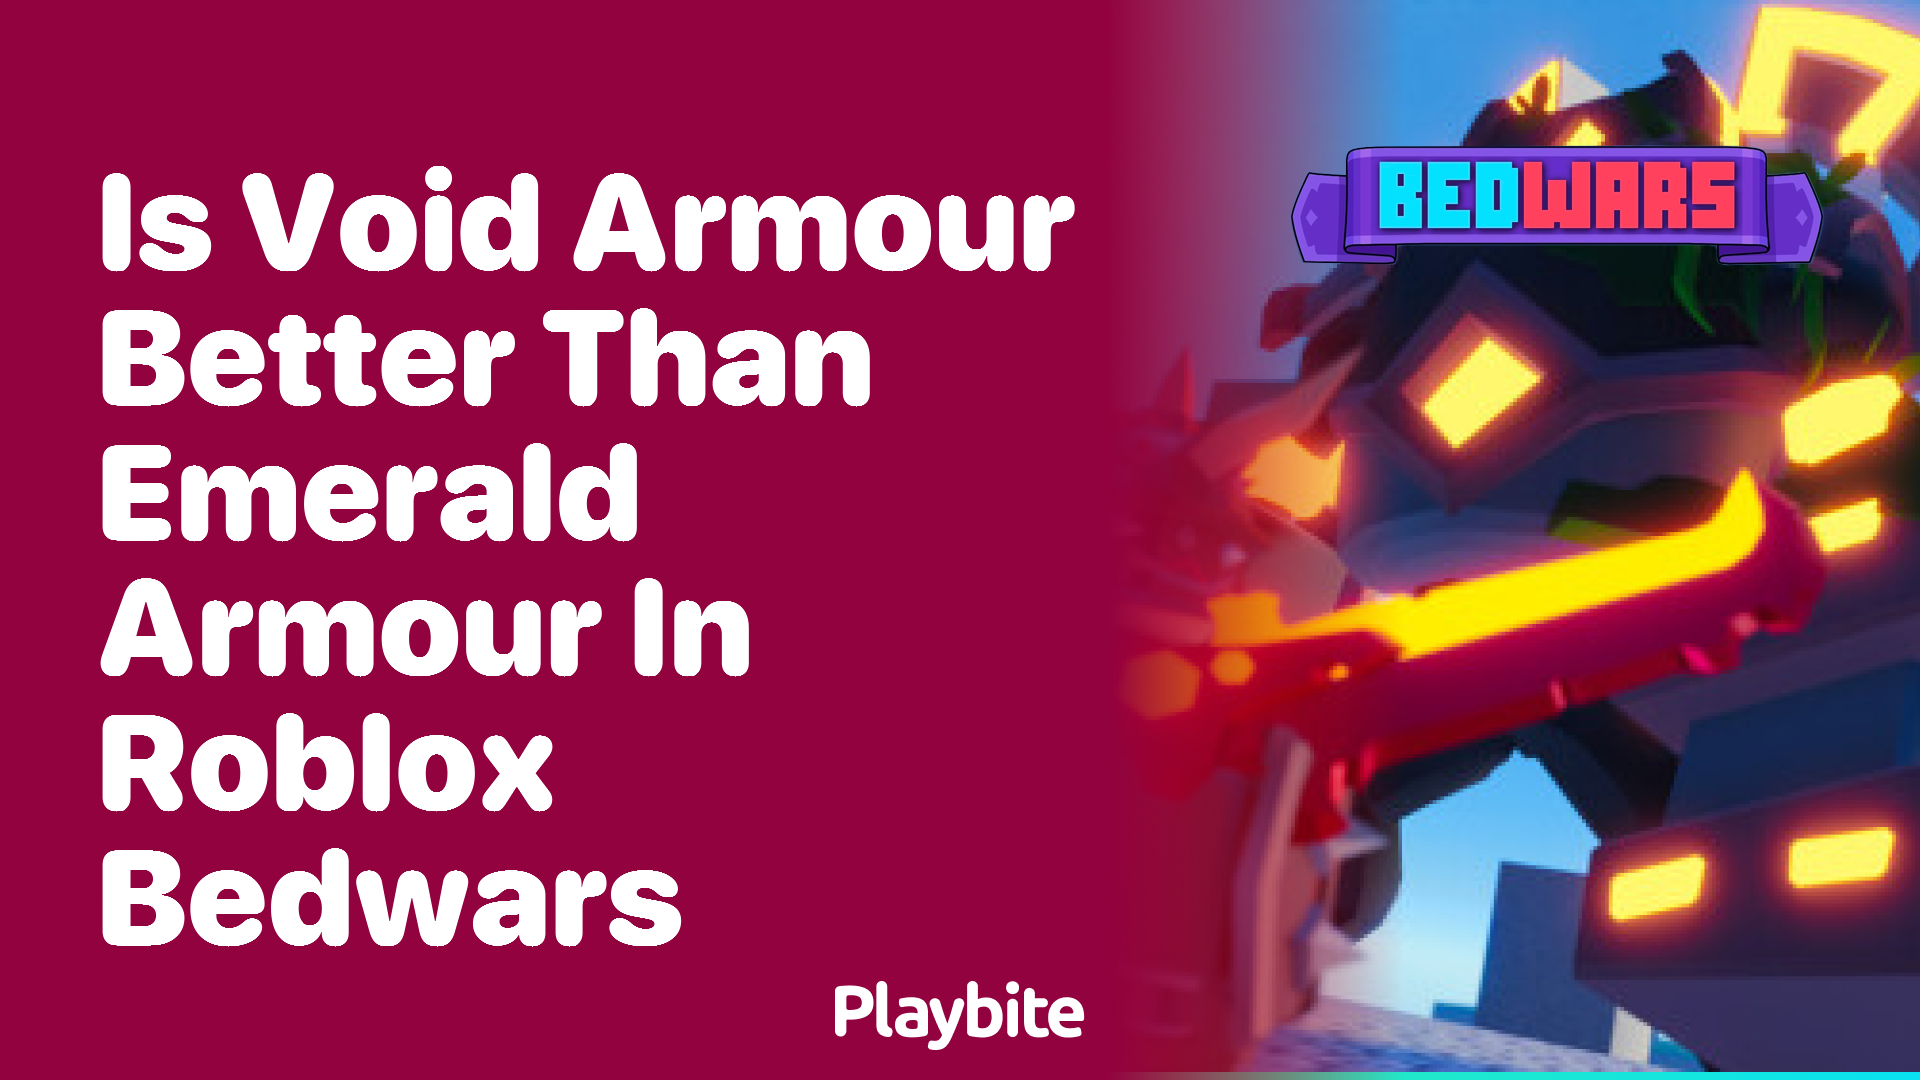 Is Void Armor Better Than Emerald Armor in Roblox Bedwars?